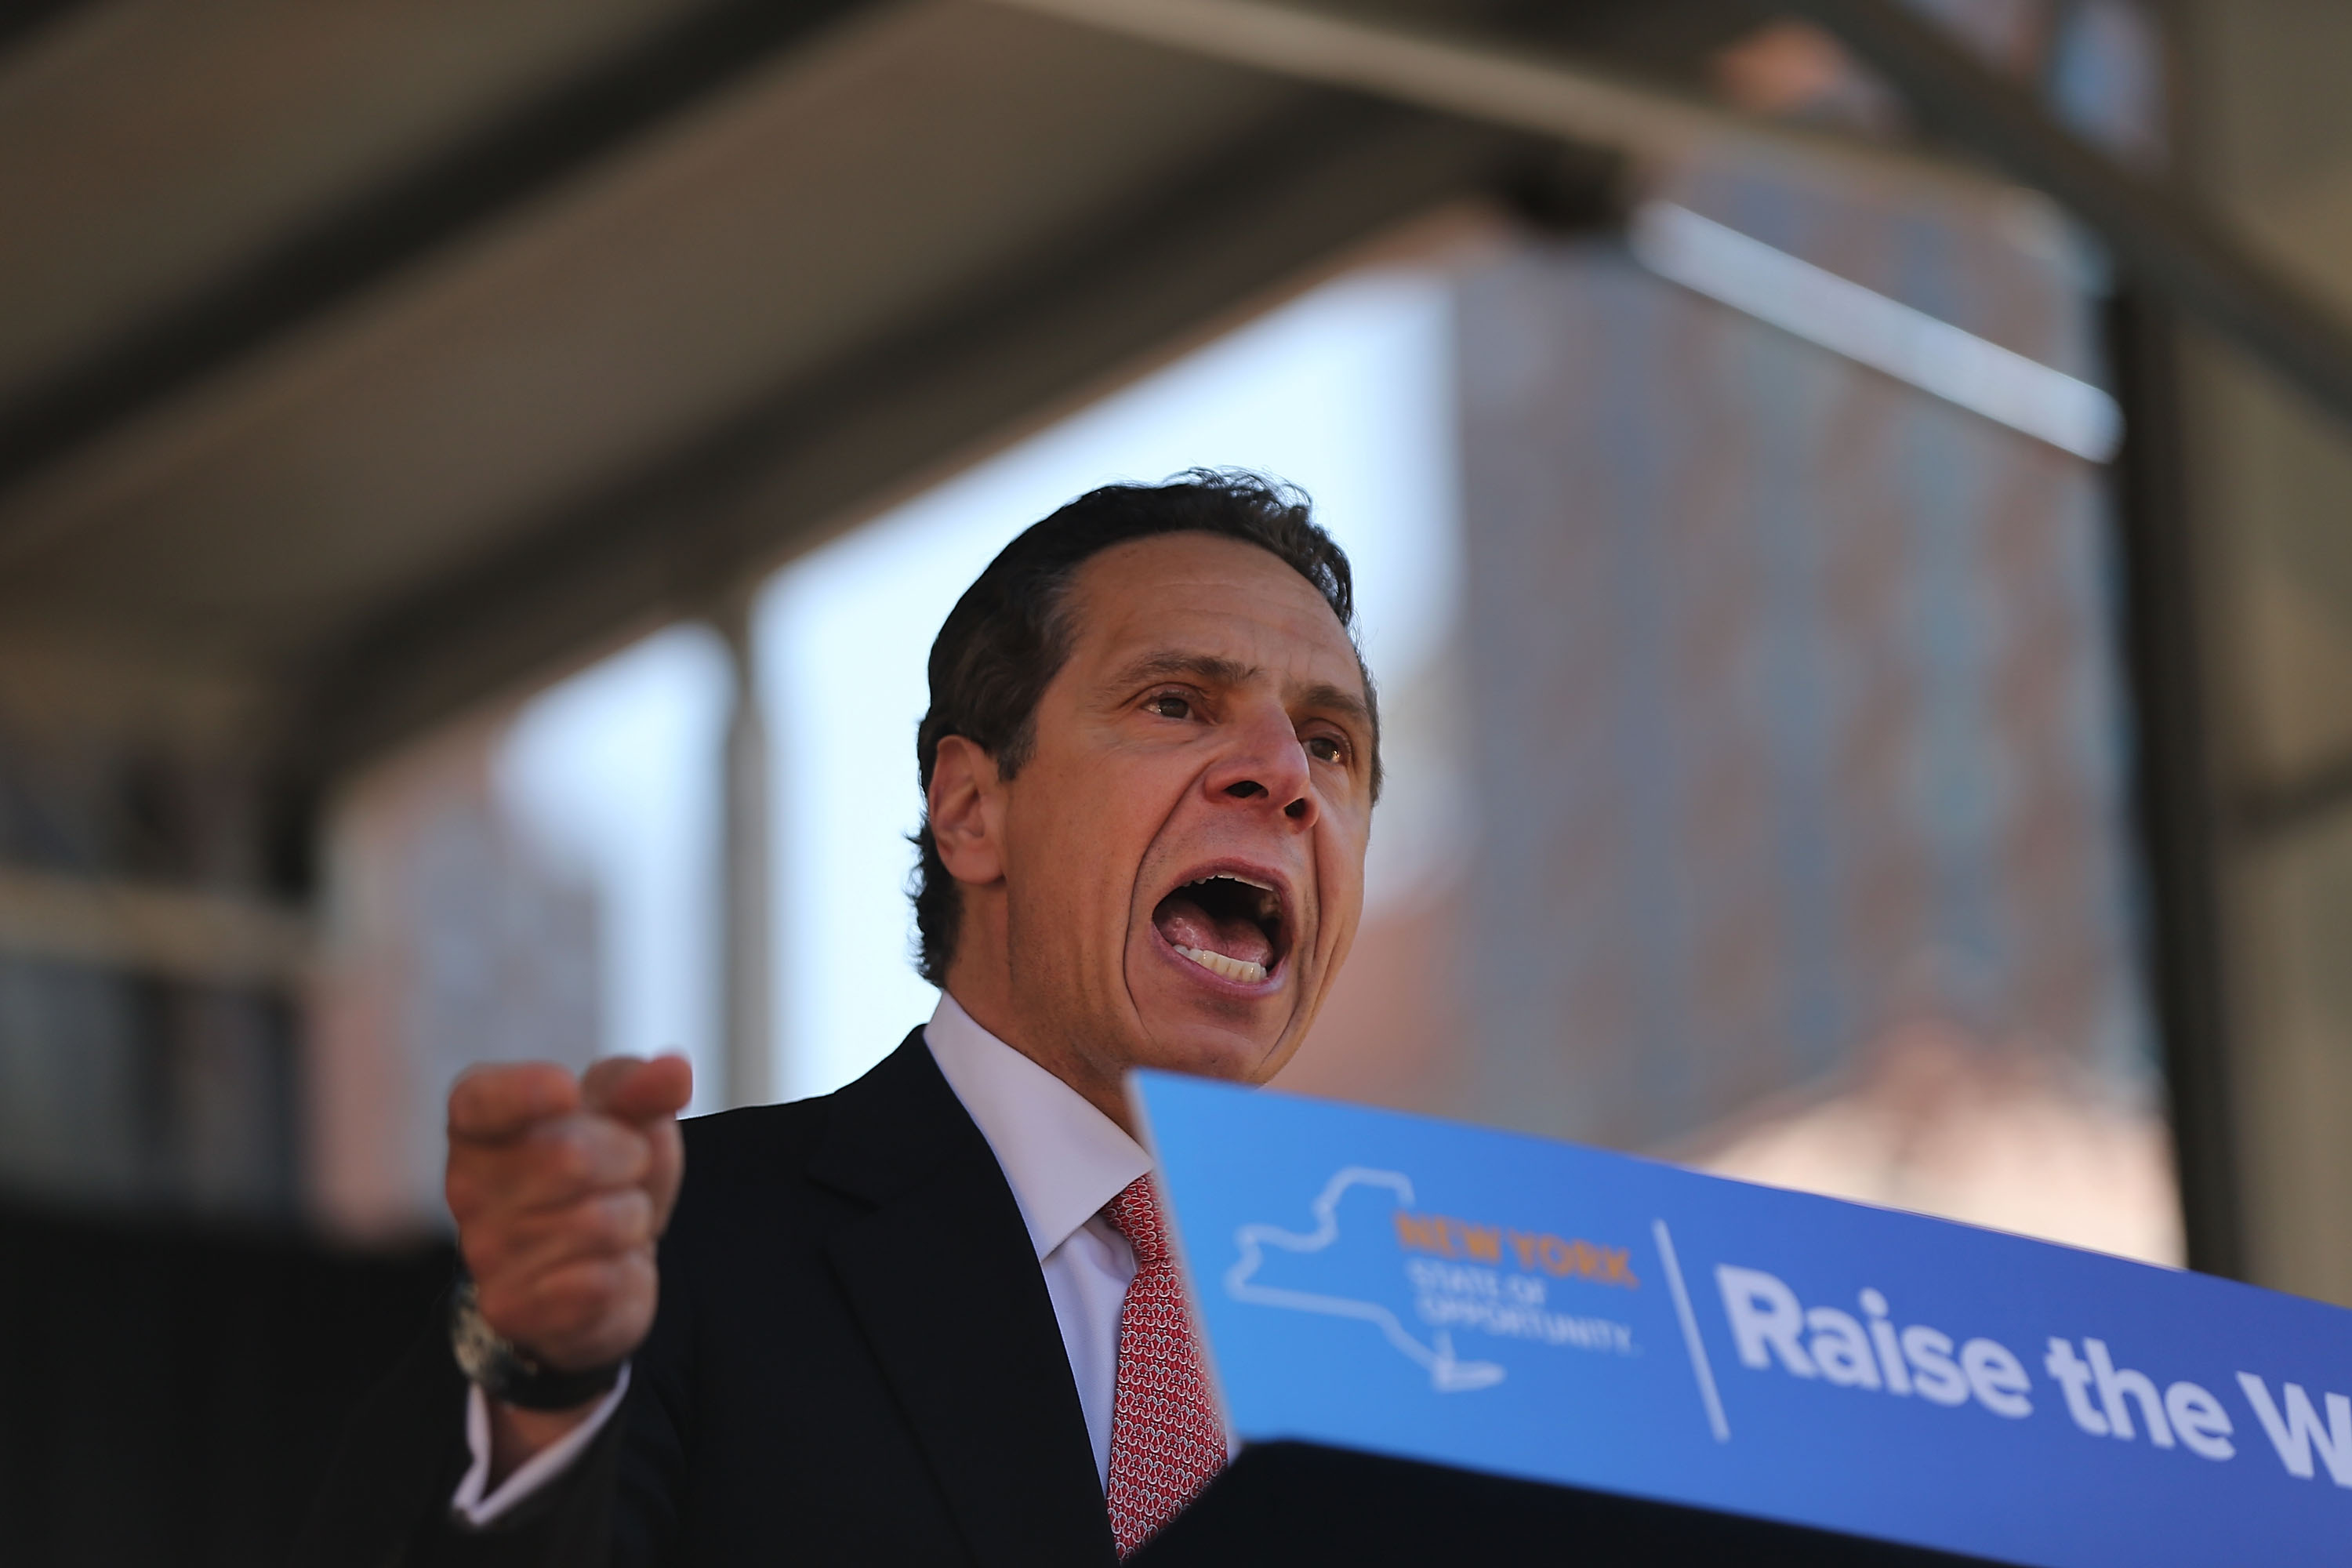 New York Governor Andrew Cuomo speaks to labor leaders and union workers at a rally in Union Square on May 7, 2015 in New York City. (Photo: Spencer Platt/Getty Images)